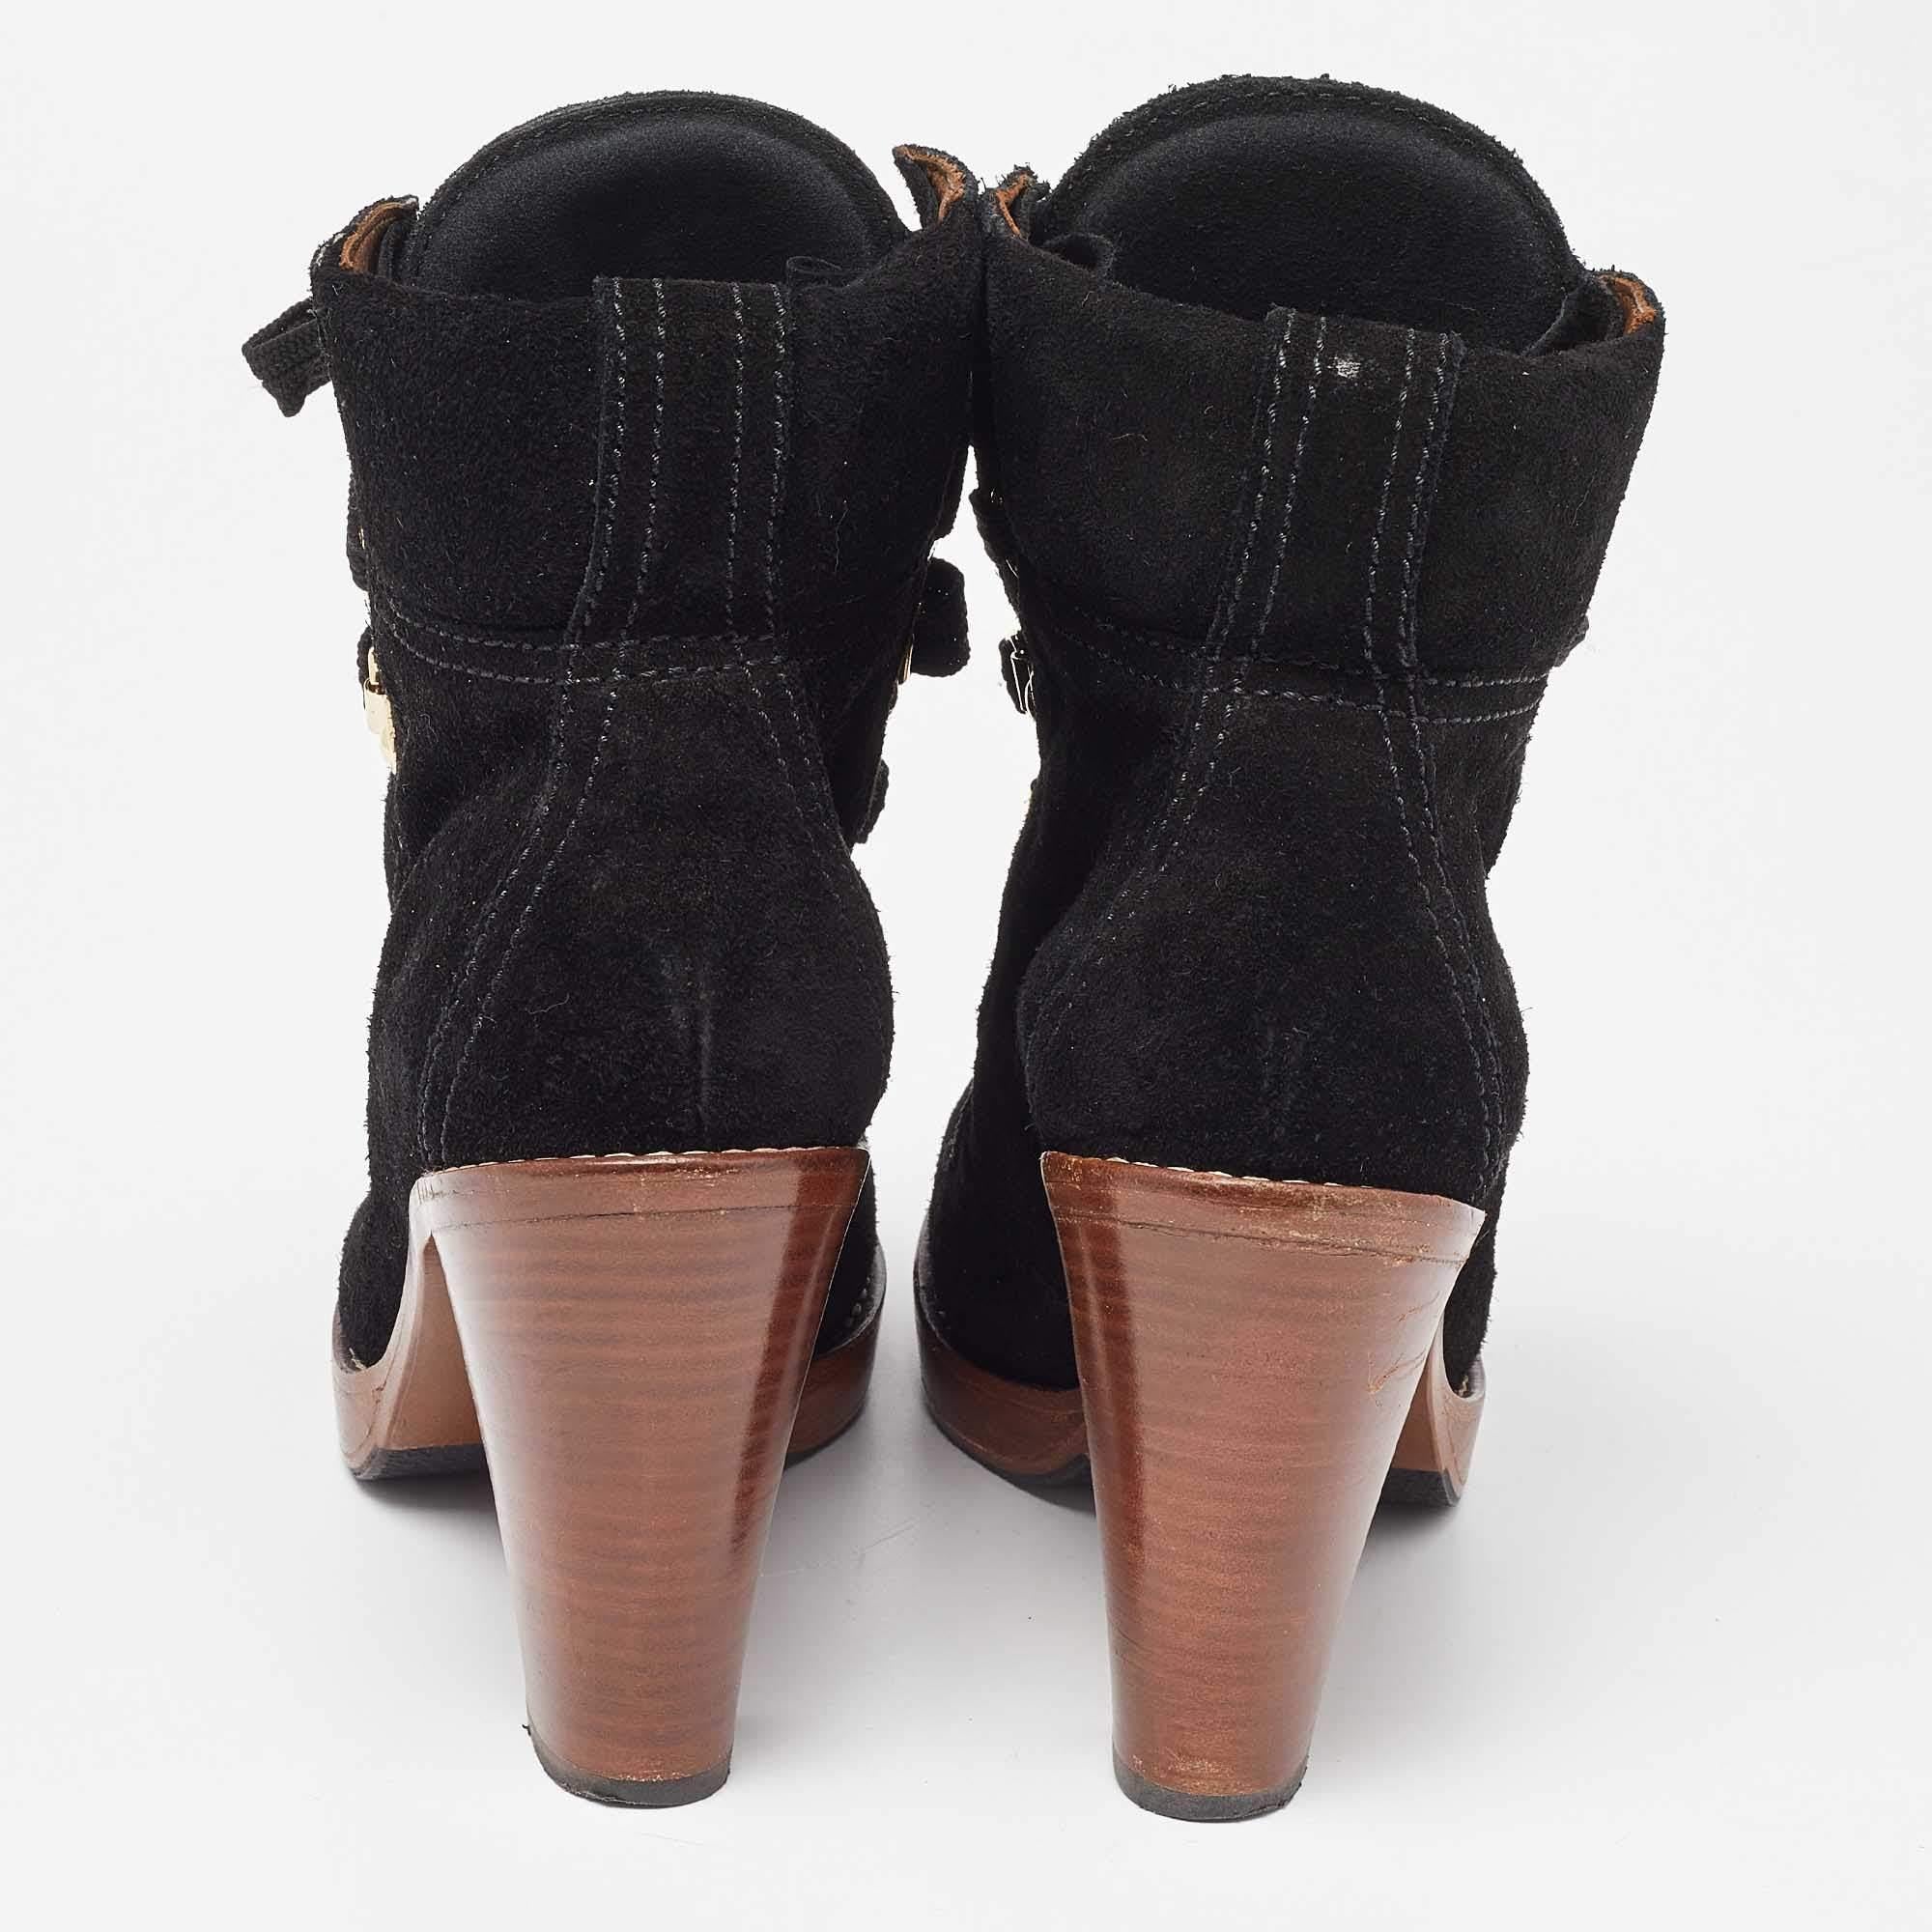 Dolce & Gabbana Black Suede Lace Up Ankle Boots Size 38 For Sale 1